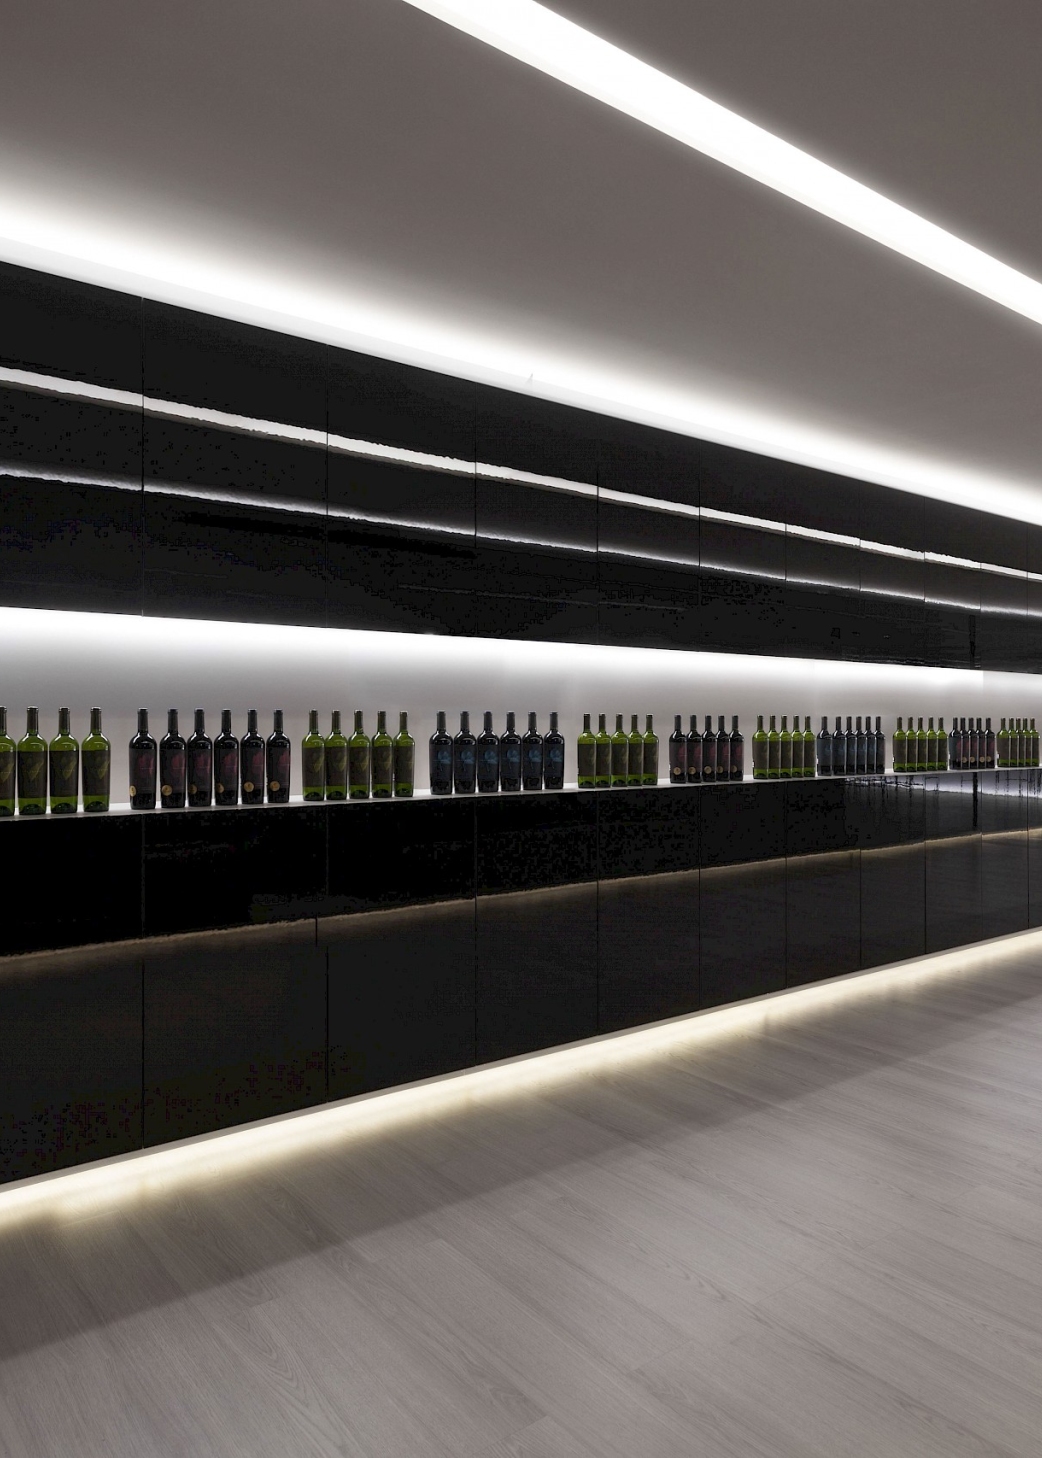 Fine wines presented like works of art – the concept behind the Vegamar Wine Shop in Valencia